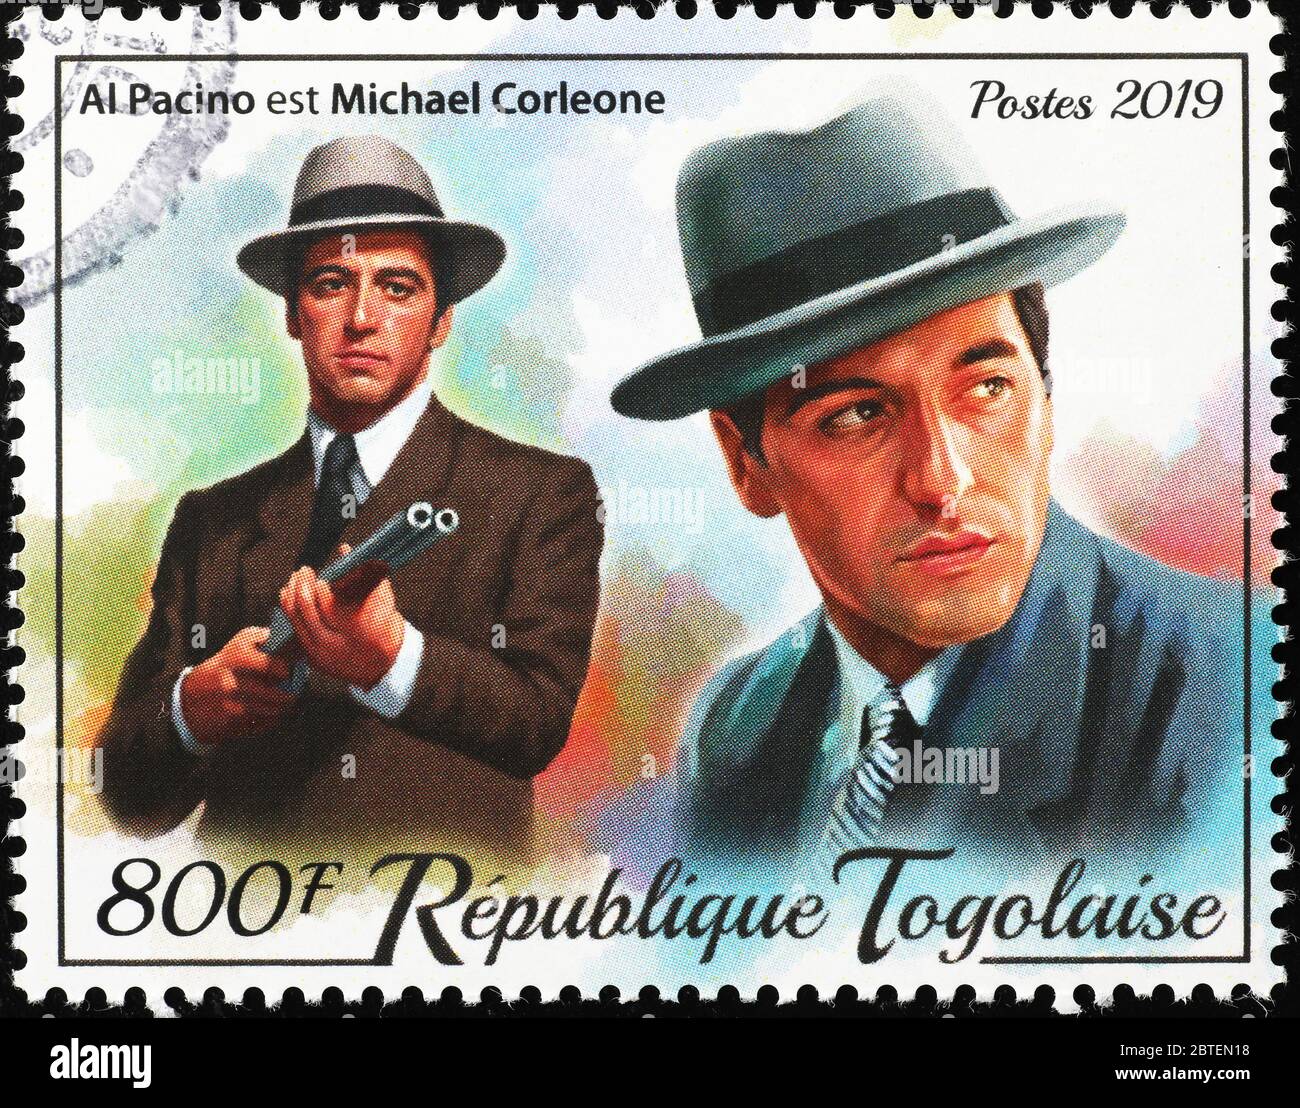 Al Pacino as Michael Corleone on postage stamp Stock Photo